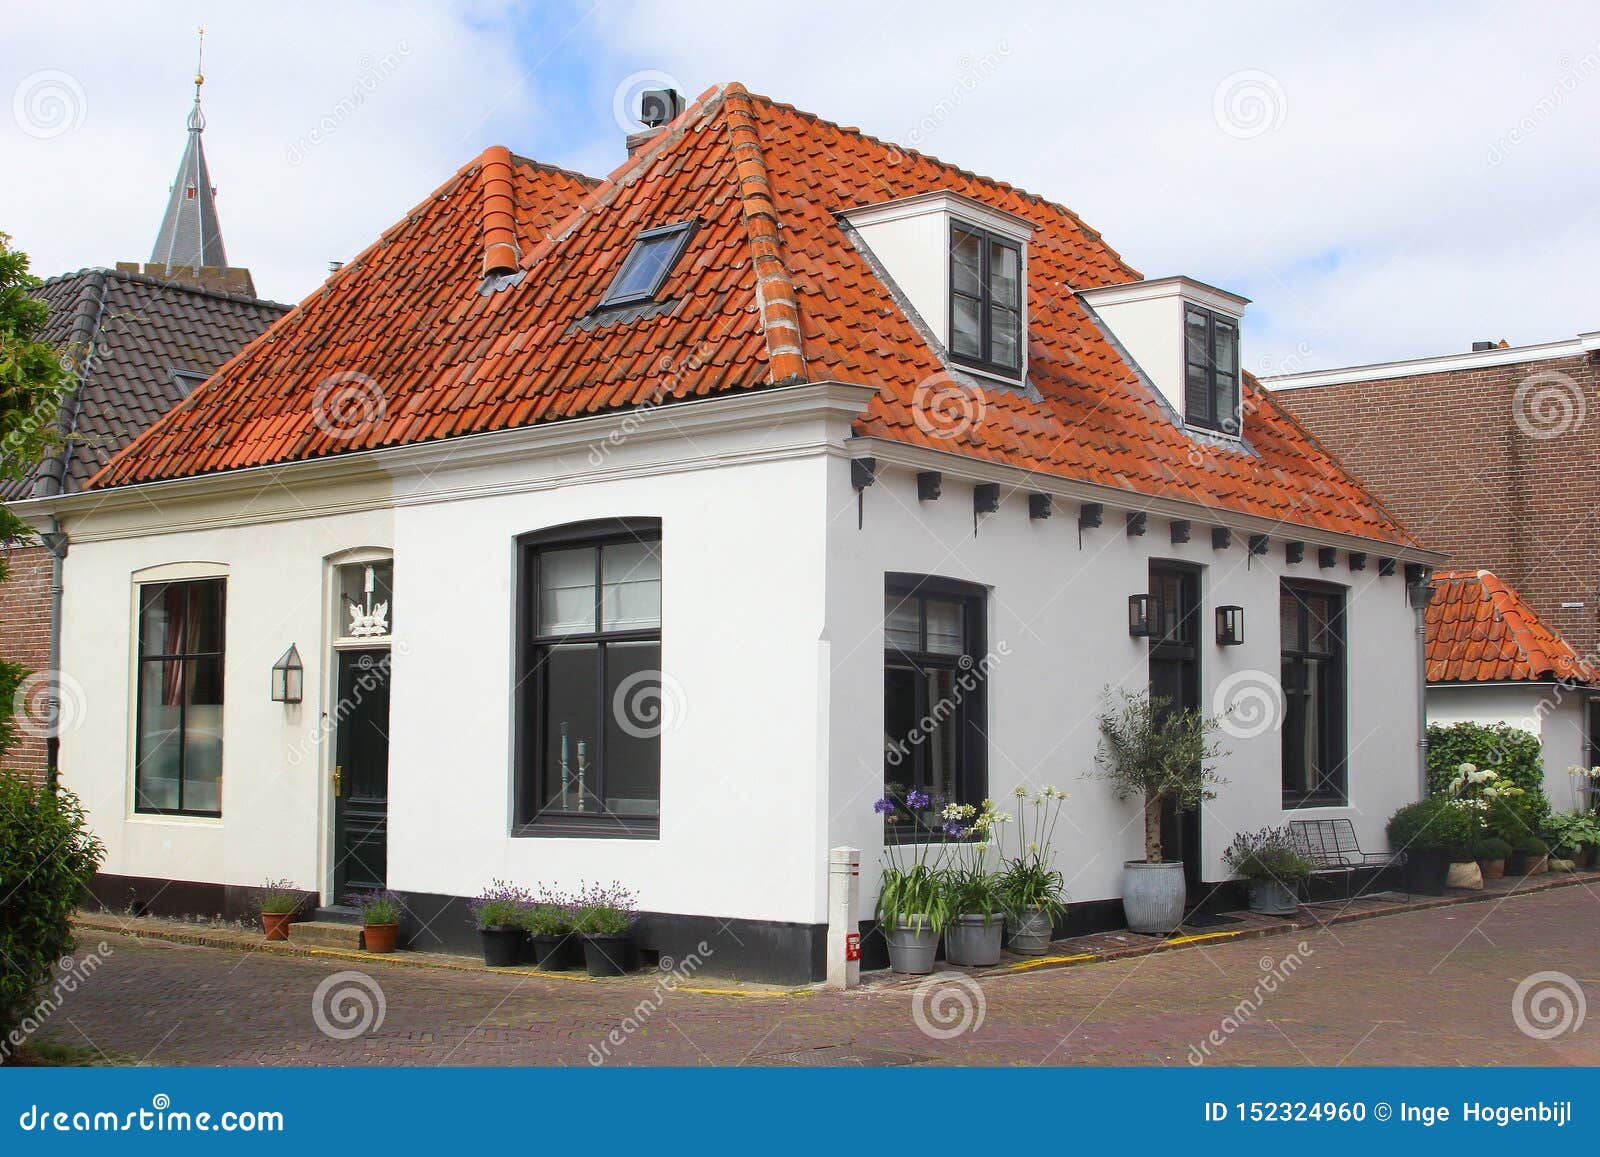 White Villa House Red Roof Plants Flowers, Netherlands Stock - Image of green, european: 152324960